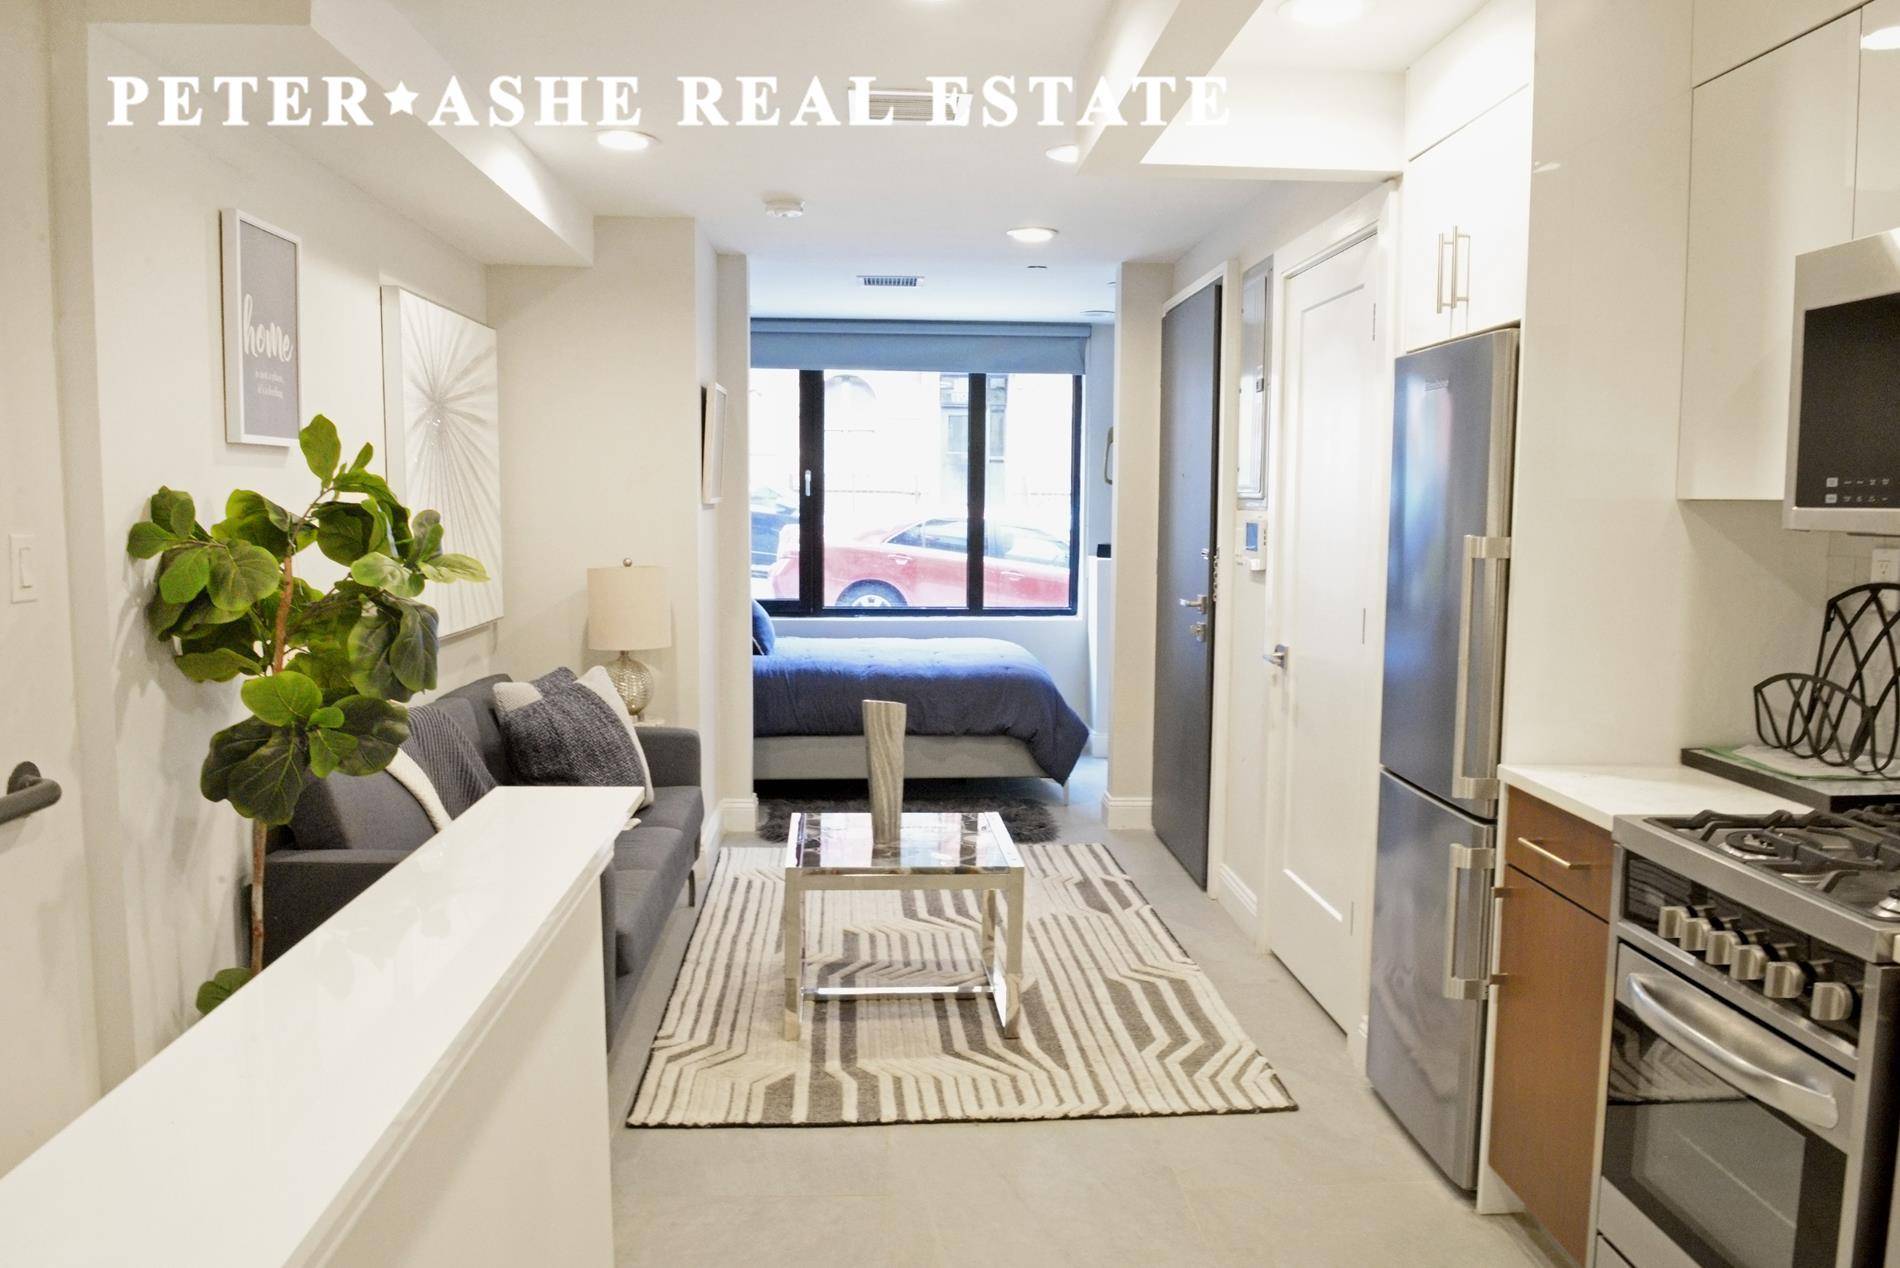 168 E 100 blends an elevated boutique living experience w the best NYC has to offer.